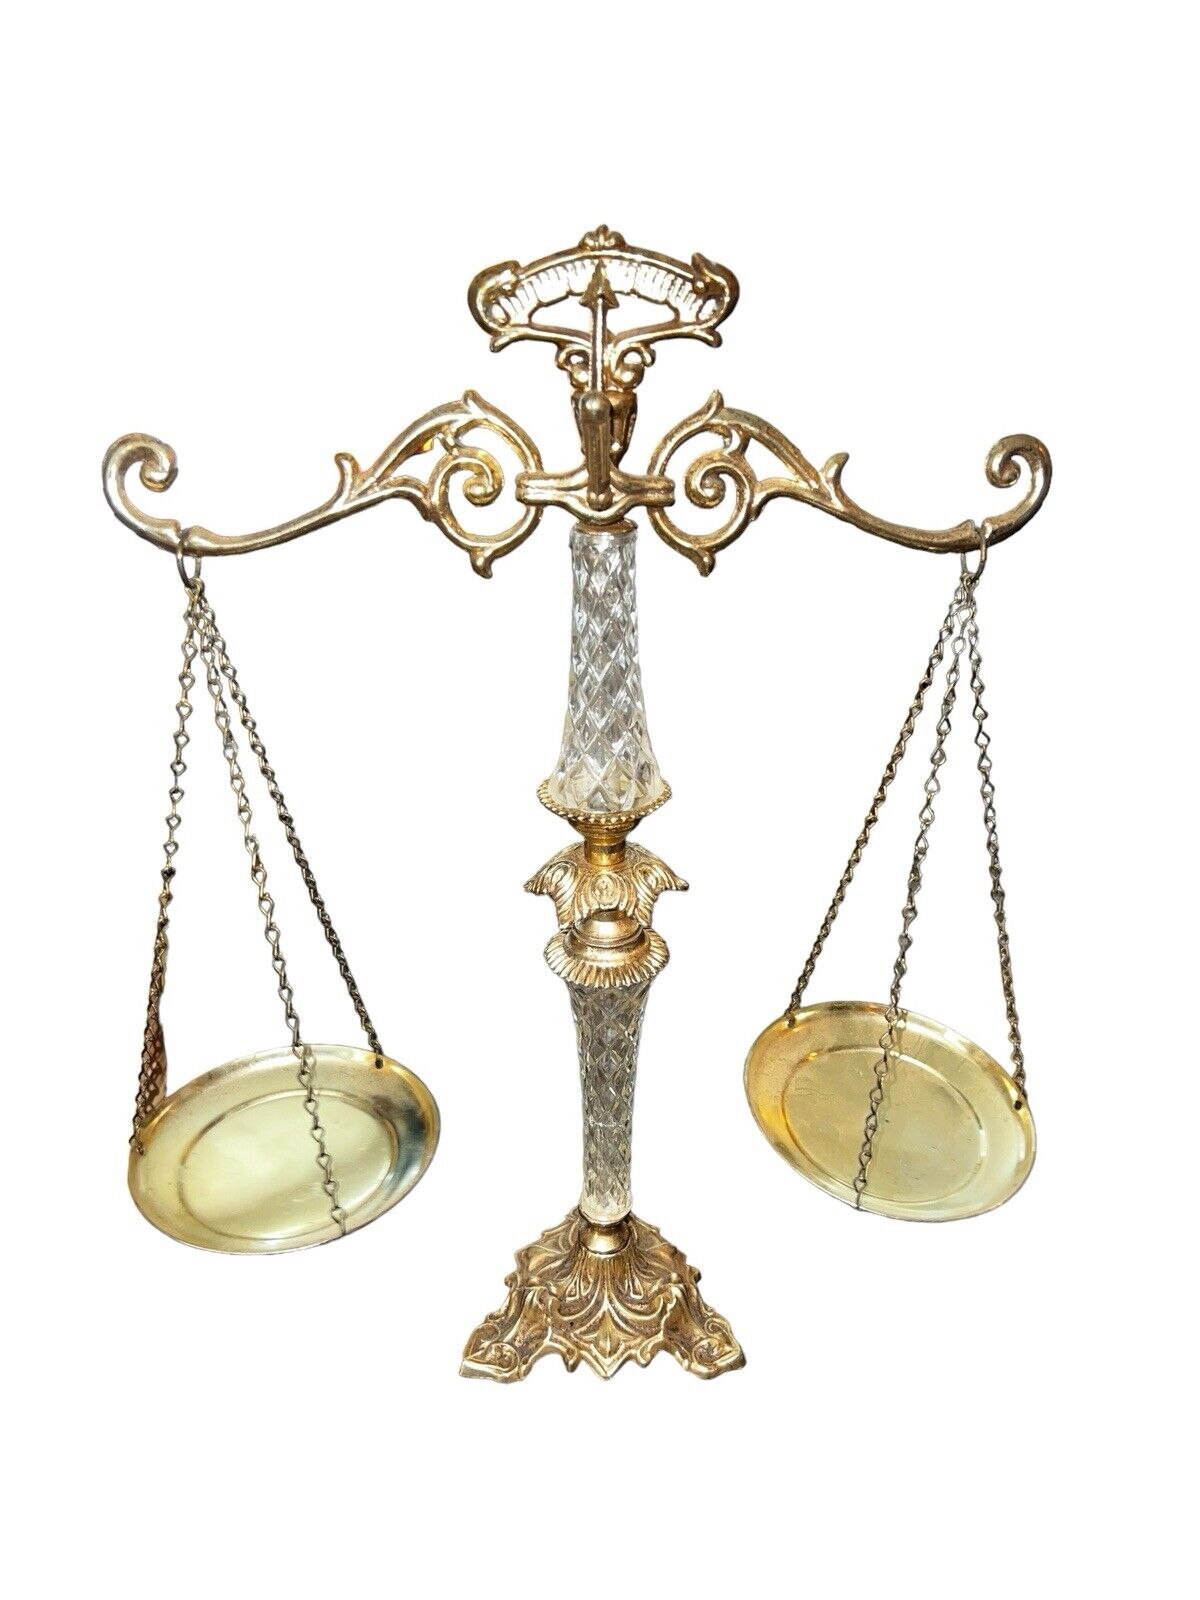 Antique Balance Law Scales of Justice Brass and Crystal Cut Lucite Libra